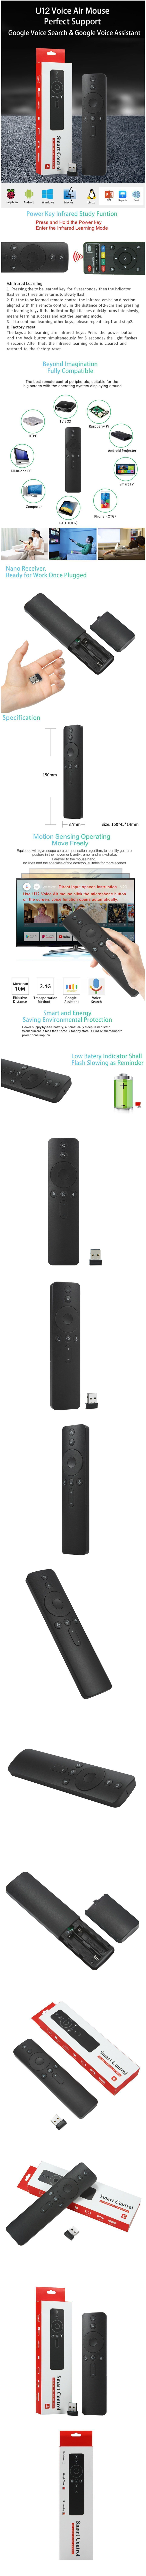 U12-24G-6-Axis-Air-Mouse-Voice-Control-Fly-Per-Android-Tv-Box-Mini-PcTvWin-10-1653347